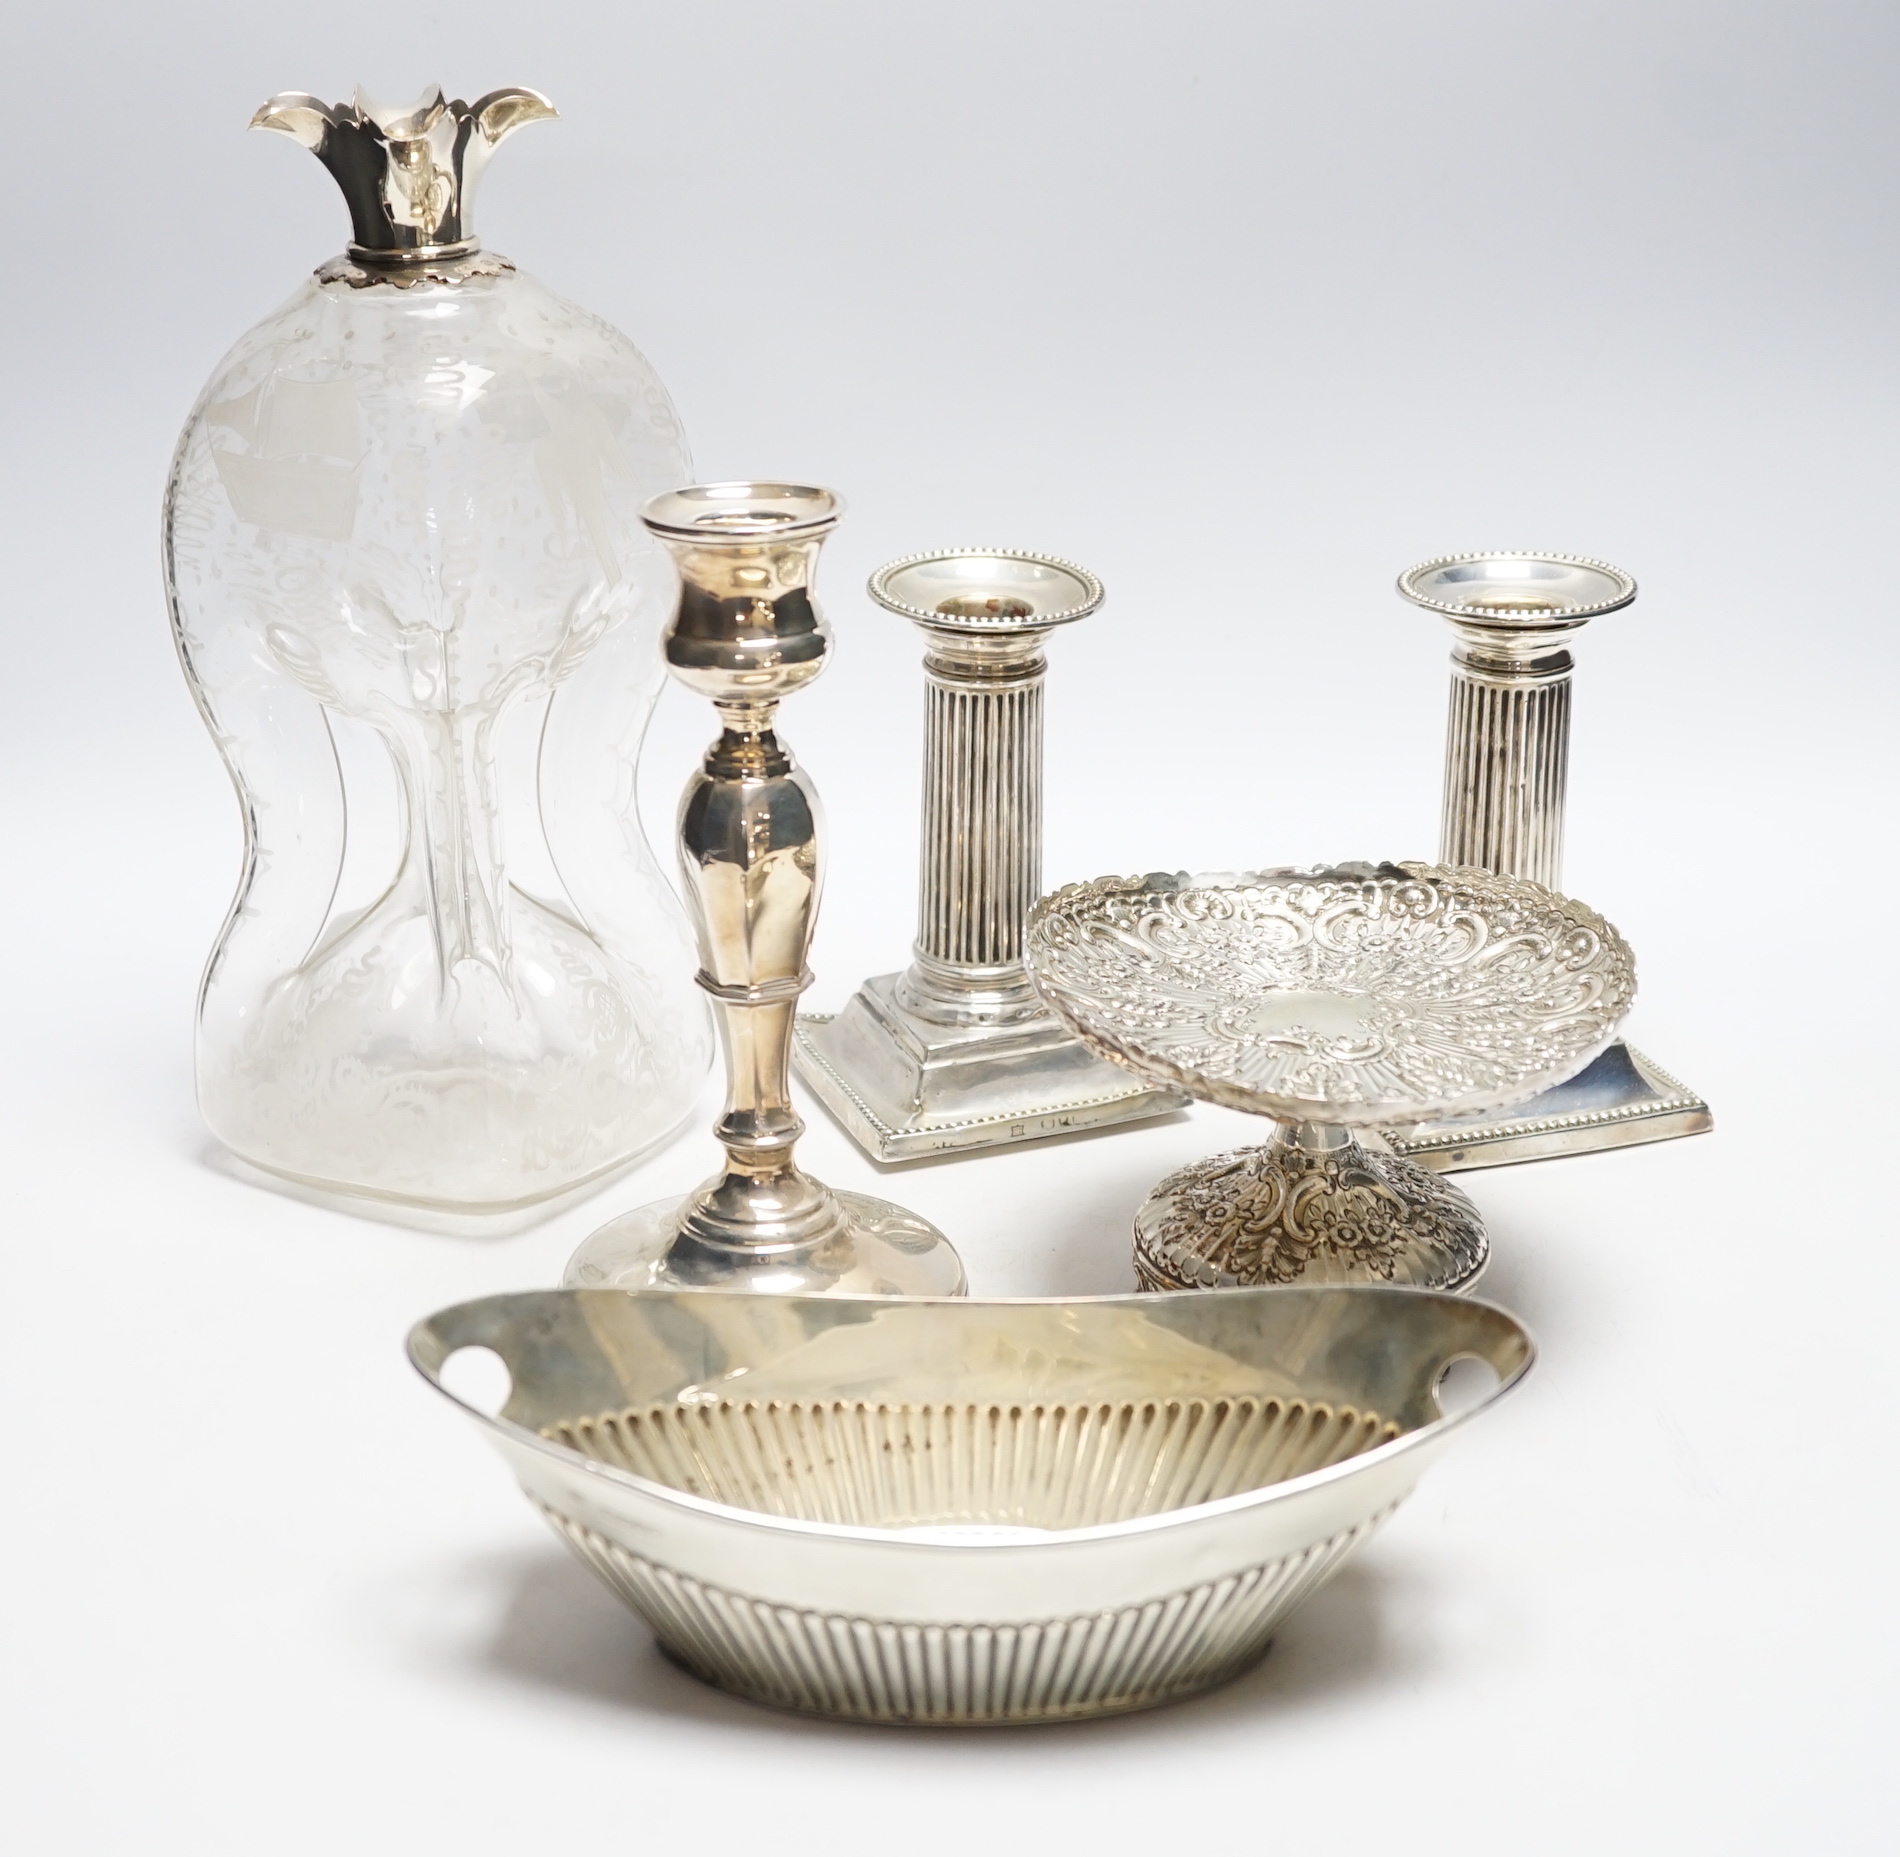 A pair of late Victorian silver mounted dwarf candlesticks, (a.f.)12.8cm, one other candlestick, a silver tazze, silver oval dish and a silver mounted glass decanter (lacking stopper).